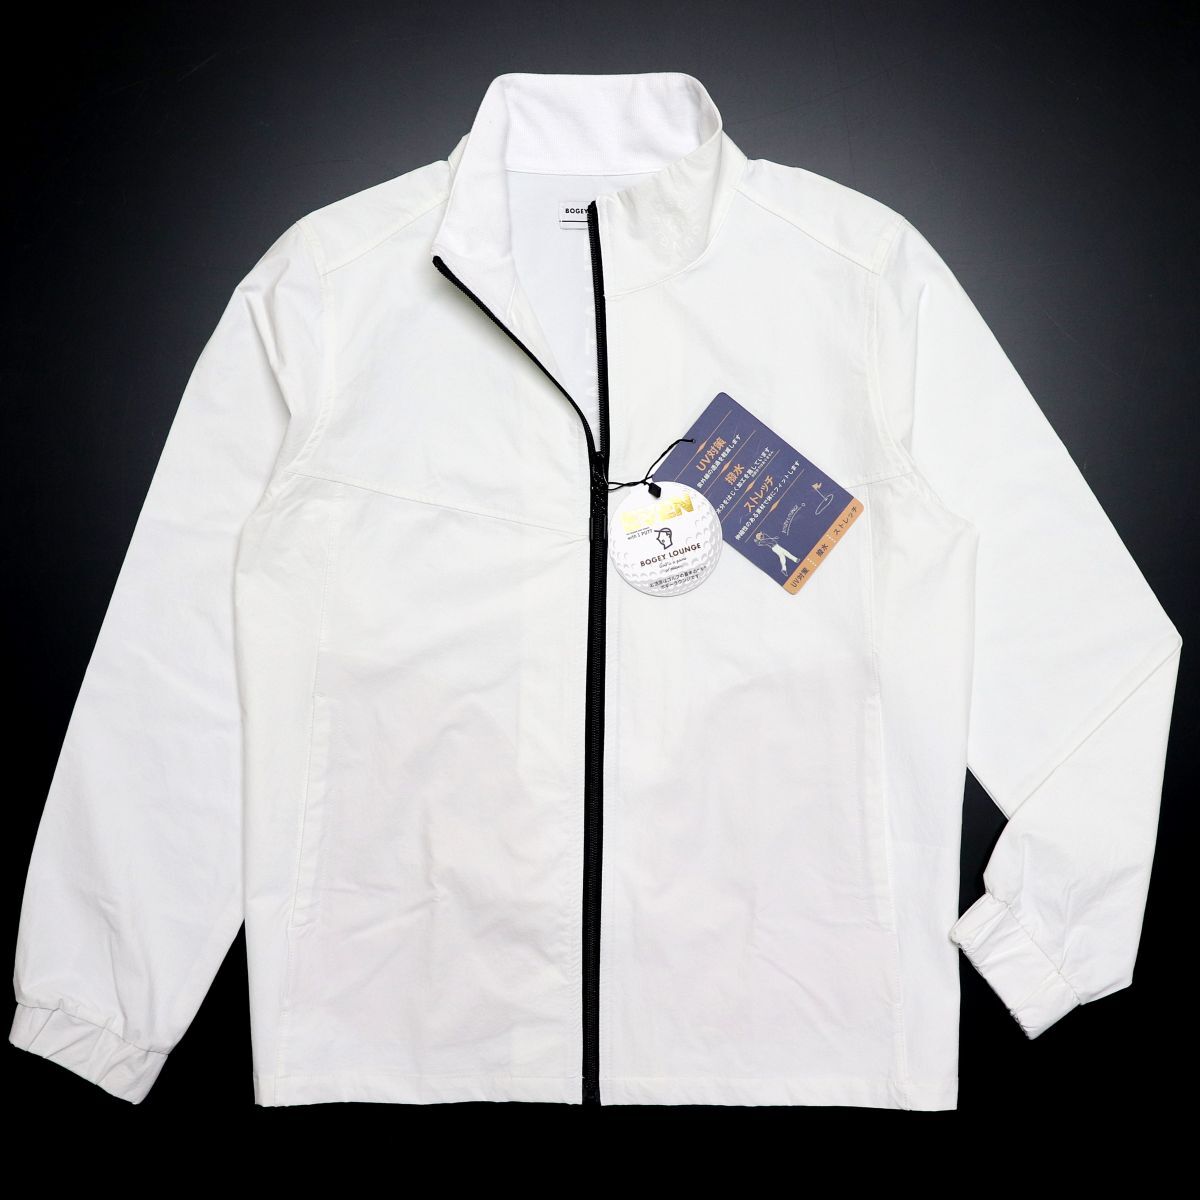 *bogi- lounge Golf EVEN BOGEY LOUNGE GOLF new goods men's UV water-repellent stretch jacket white spring thing [3F101128BG-09-M] one two .*QWER*